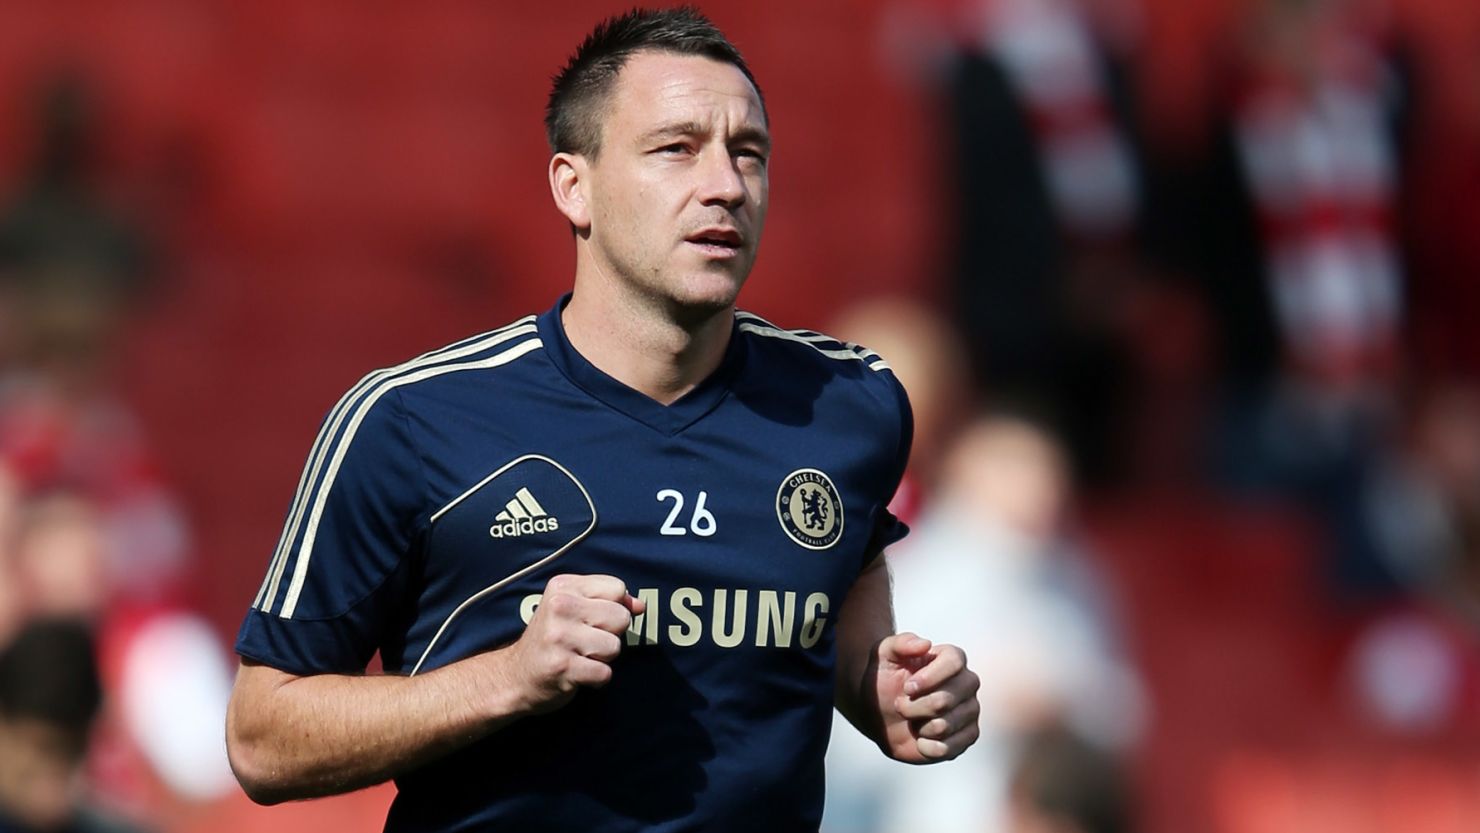 John Terry made 76 appearances for England over a nine-year period before retiring from international football.